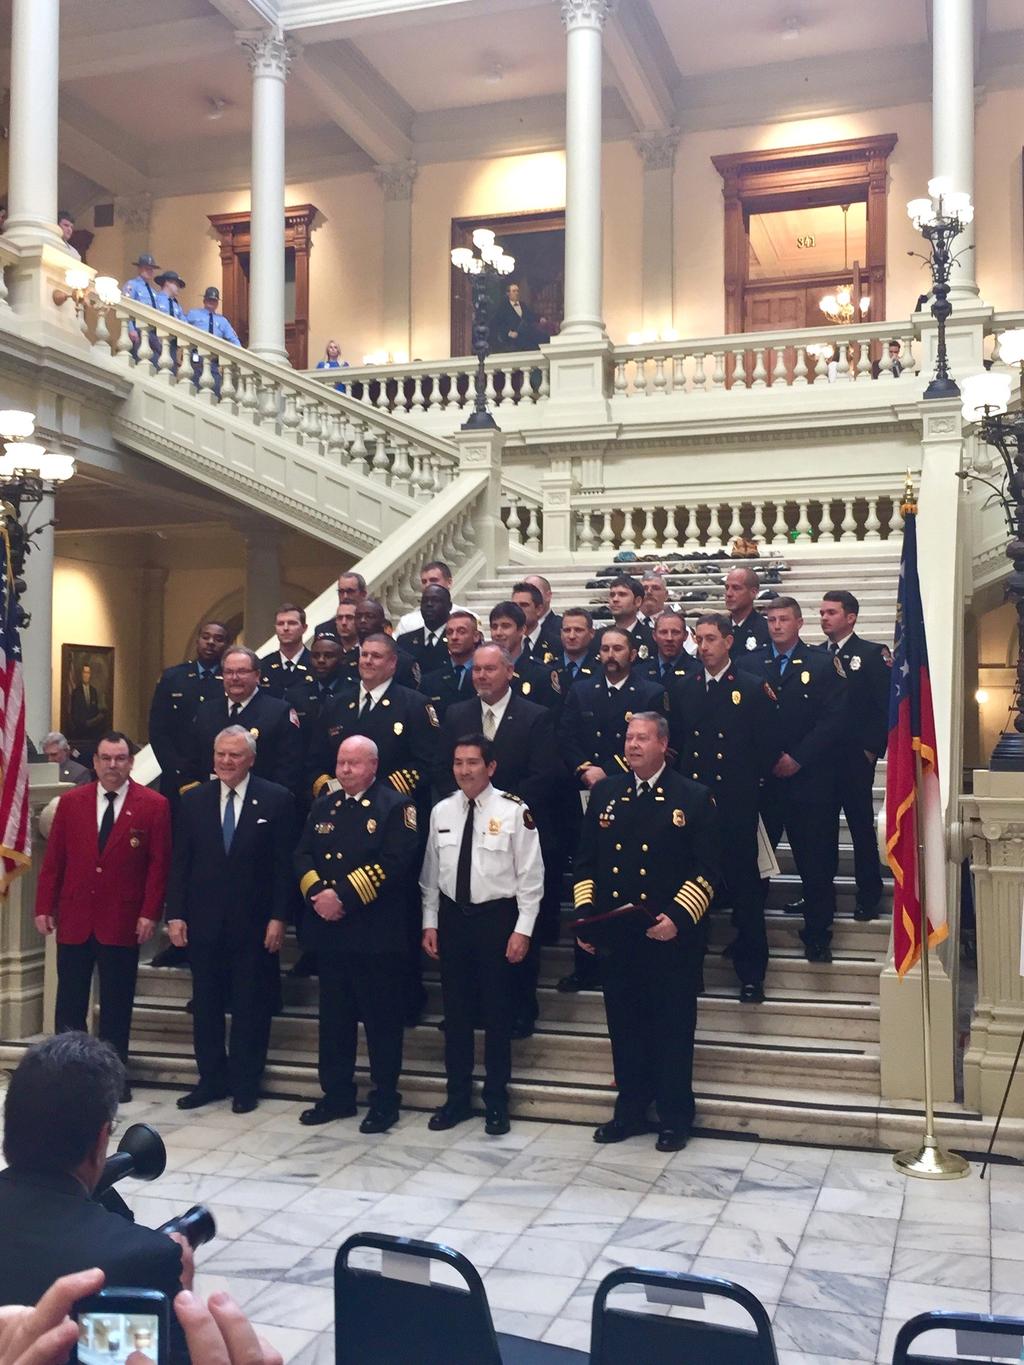 Firefighter Recognition Day at the Capitol Governor Deal honored the recipients of the 2017 Fire Service Awards at the State Capital on February 6th during the Fire Fighters